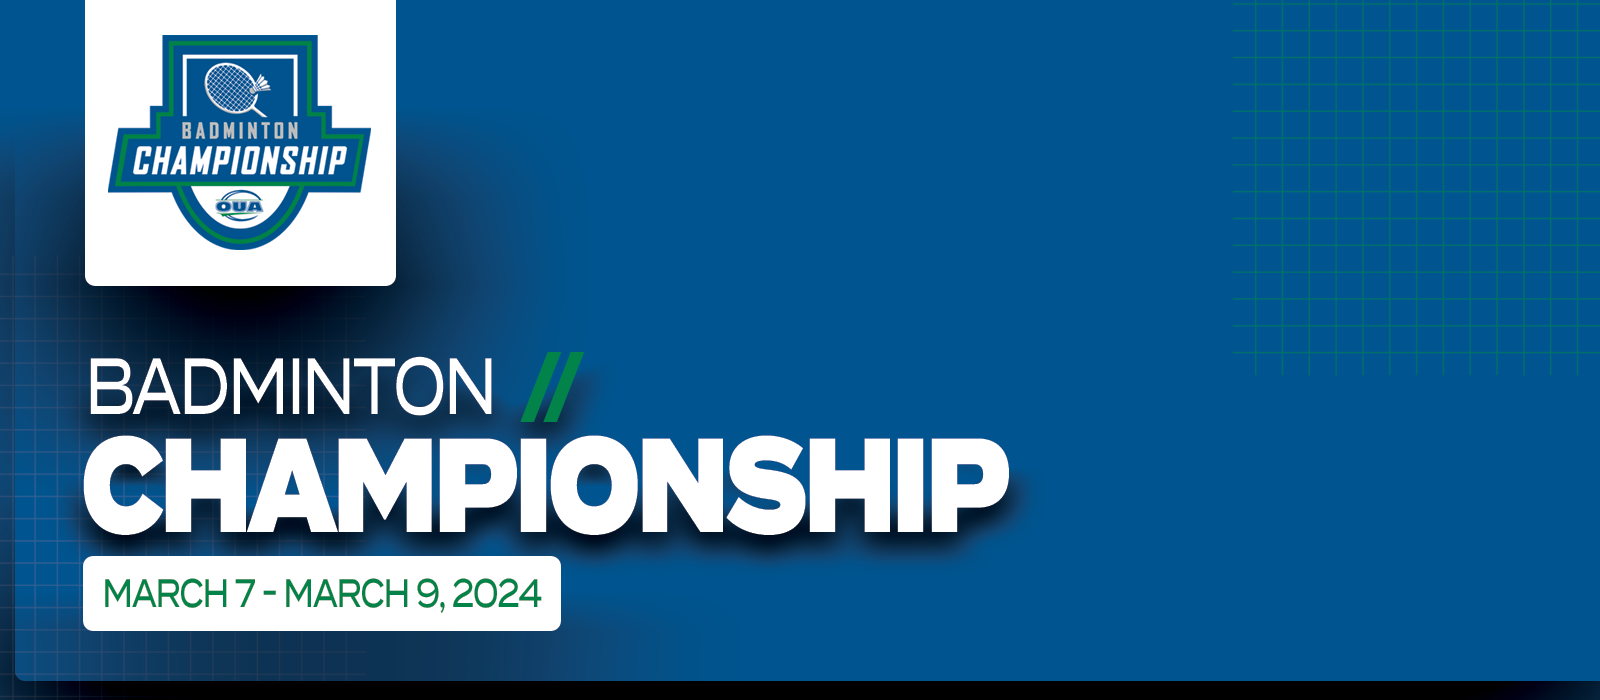 Predominantly blue graphic with large white text on the left side that reads Badminton Championship, March 7 - March 9’ beneath the OUA Badminton Championship logo